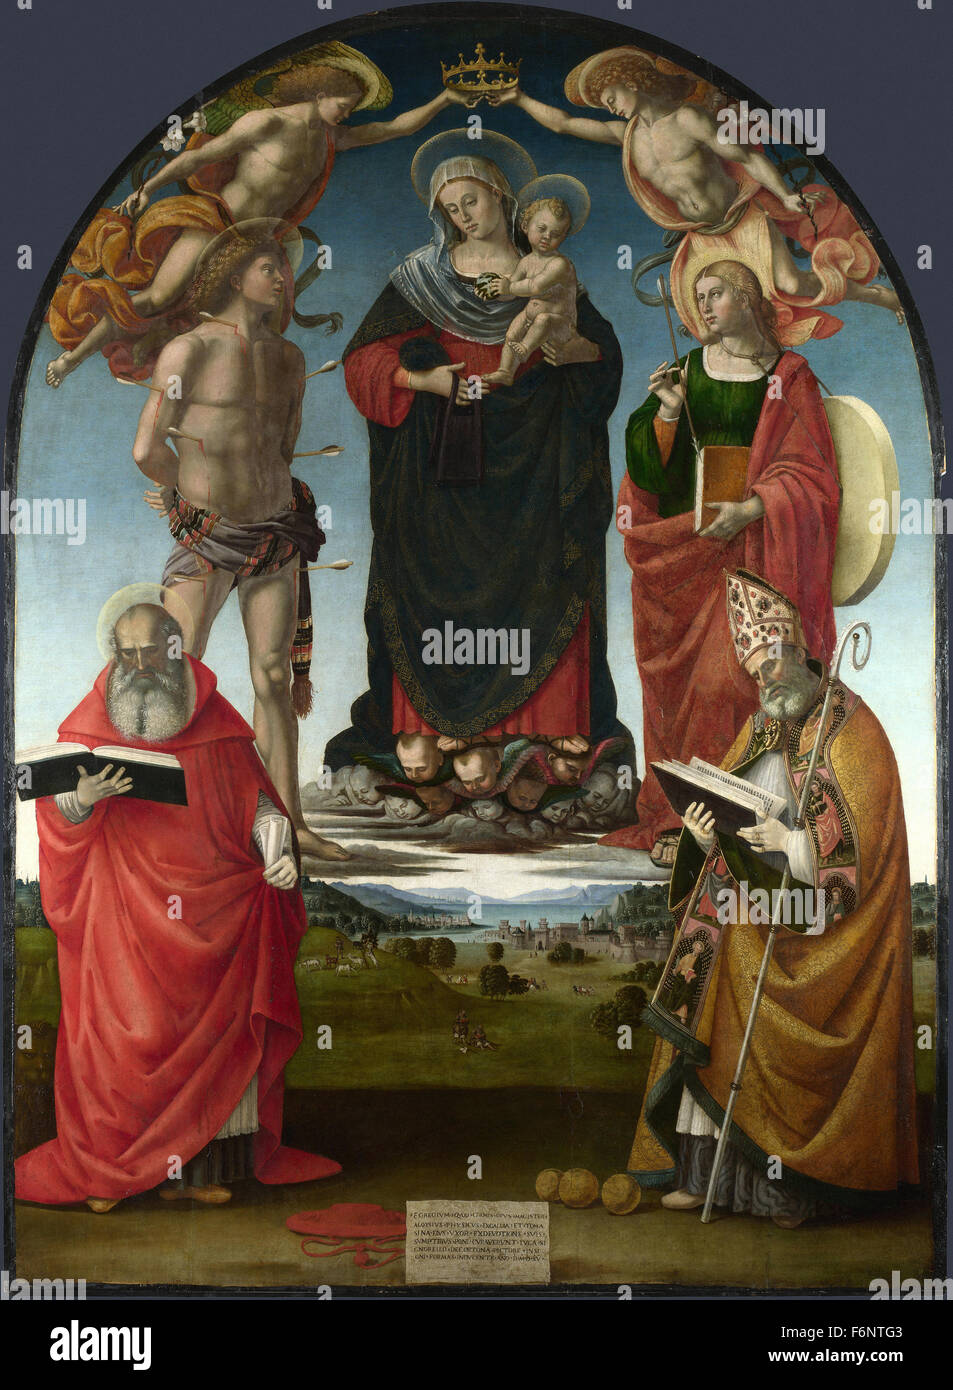 Luca Signorelli - The Virgin and Child with Saints Stock Photo